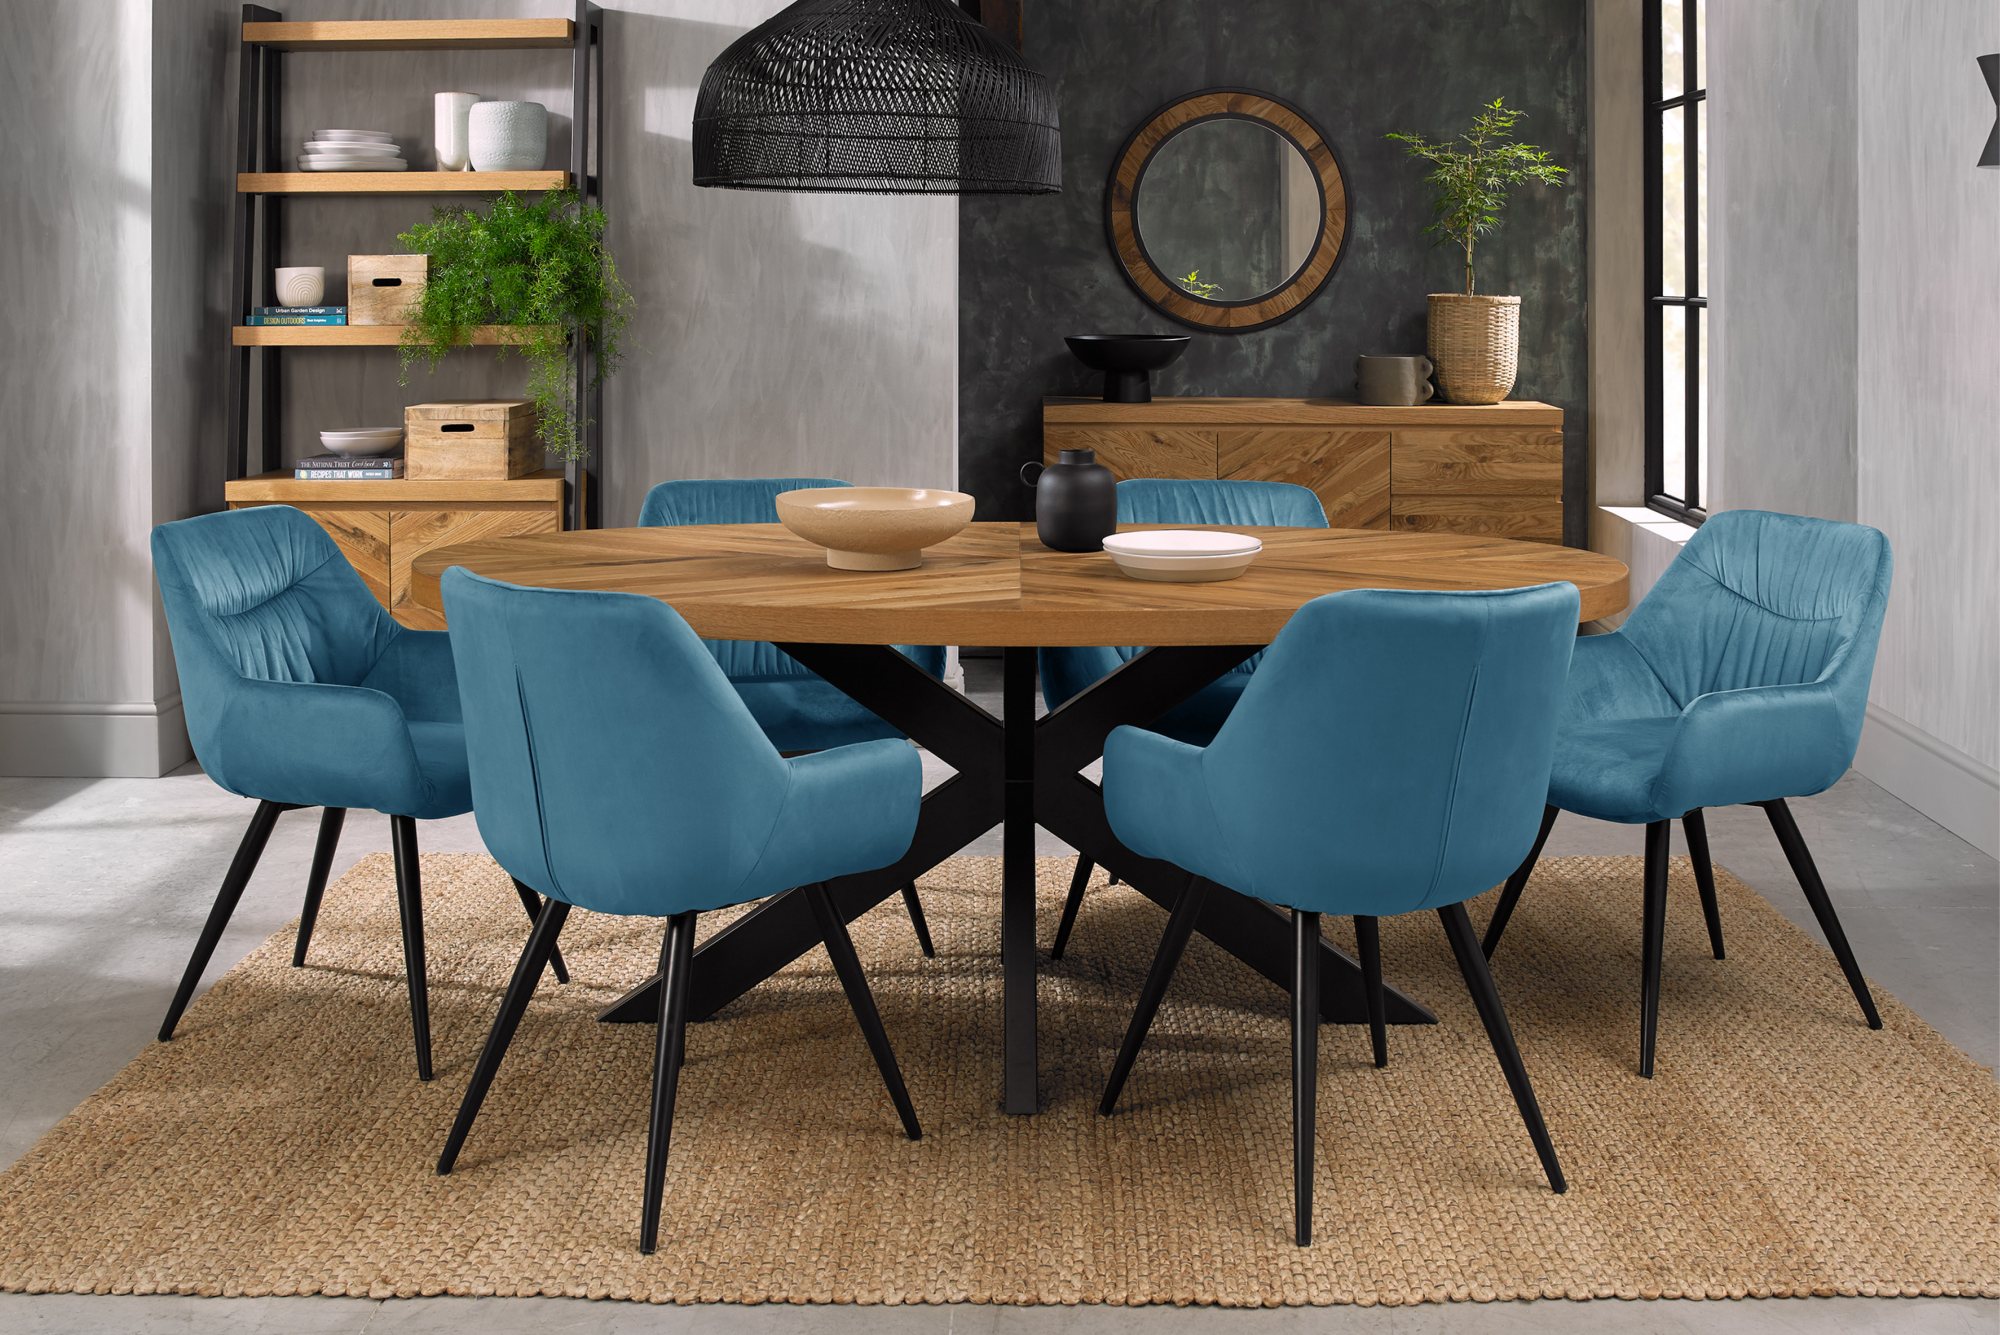 Home Origins Bosco Rustic Oak 6 seater dining table with 6 Dali chairs- petrol blue velvet fabric